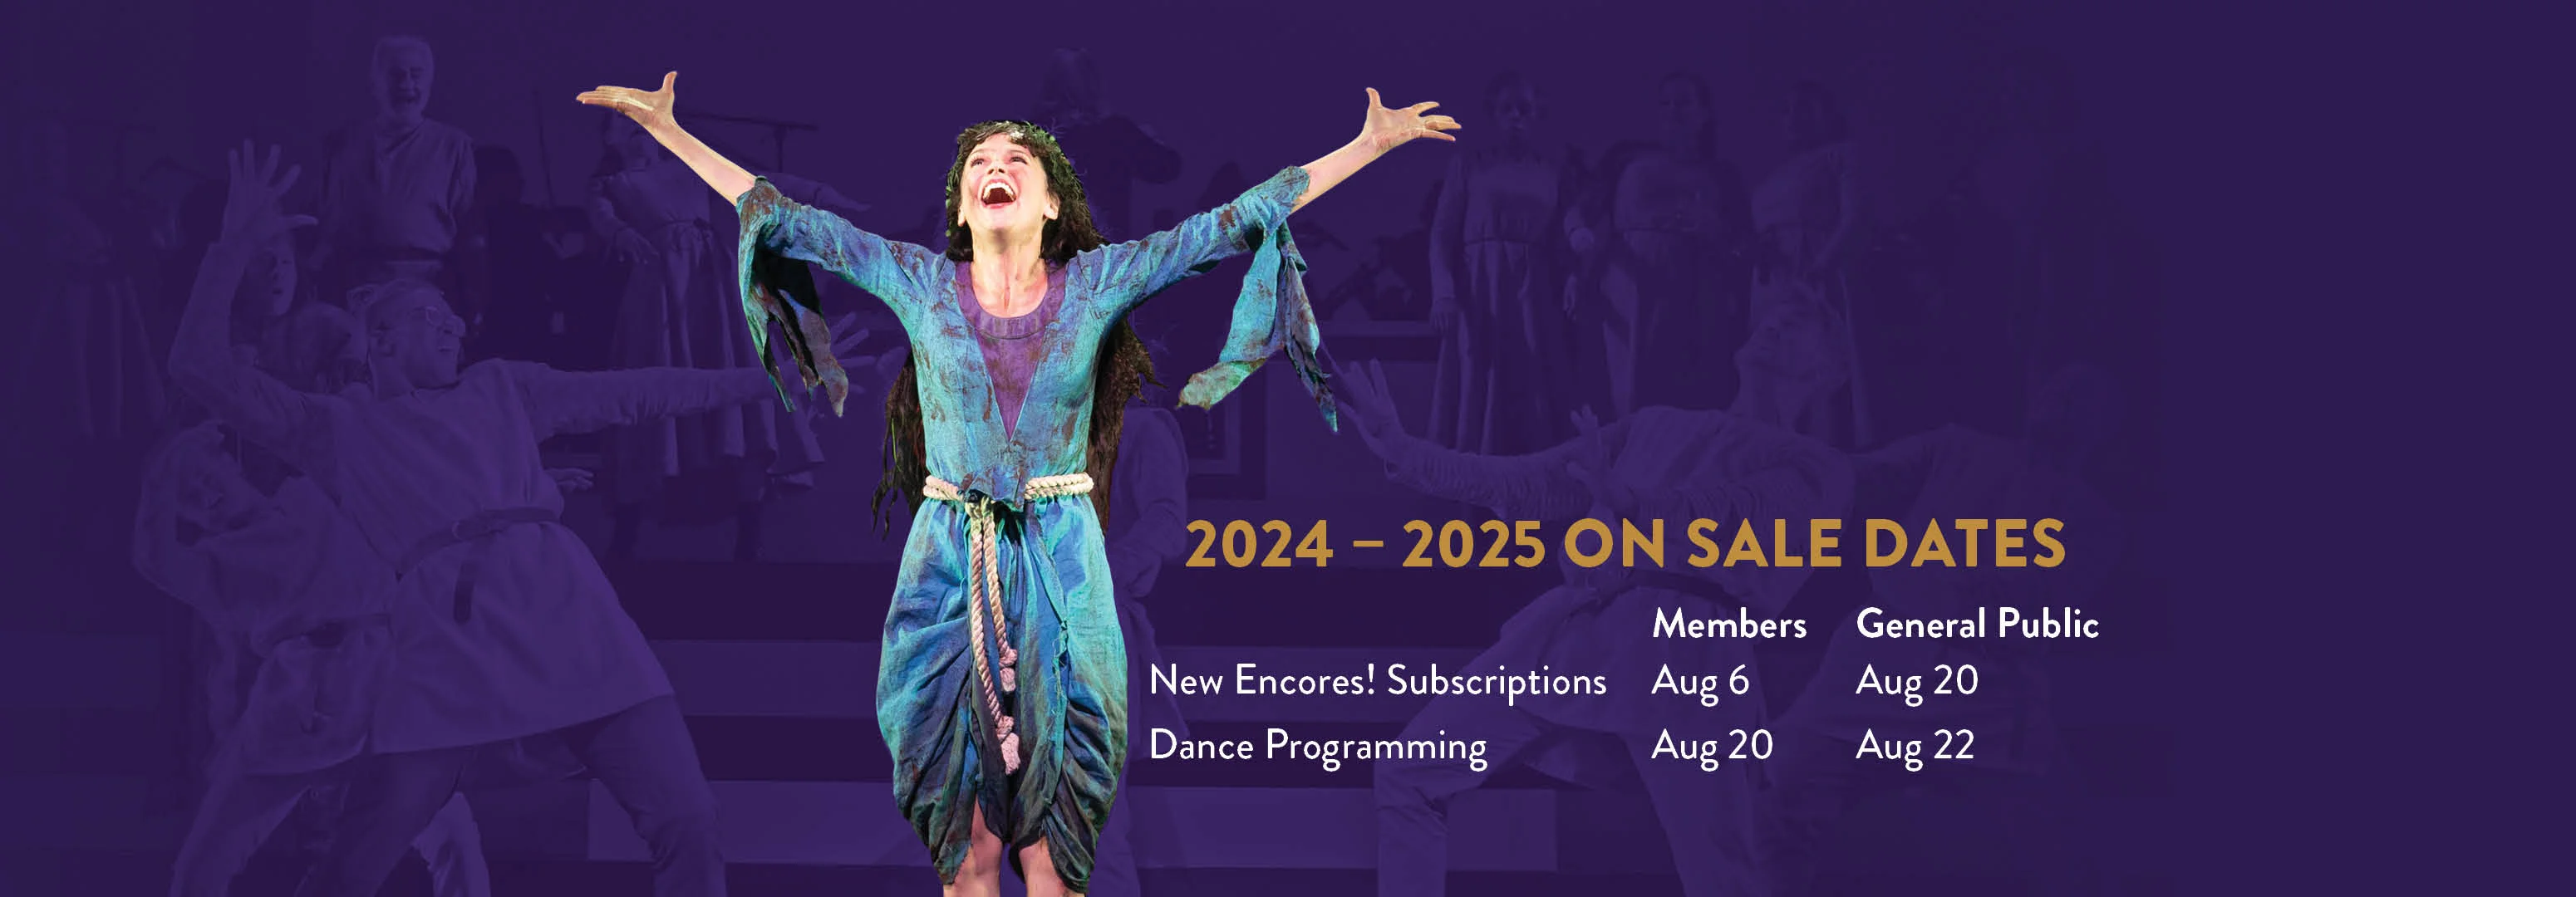 A performer in a colorful costume — Sutton Foster — stands center stage with arms outstretched. Text beside her reads "2024 – 2025 On Sale Dates for Members (August 6 for new Encores! subscriptions, August 20 for dance programming) and General Public (August 20 for new Encores! subscriptions, August 22 for dance programming).” The background is a dark shade with faint images of other performers.